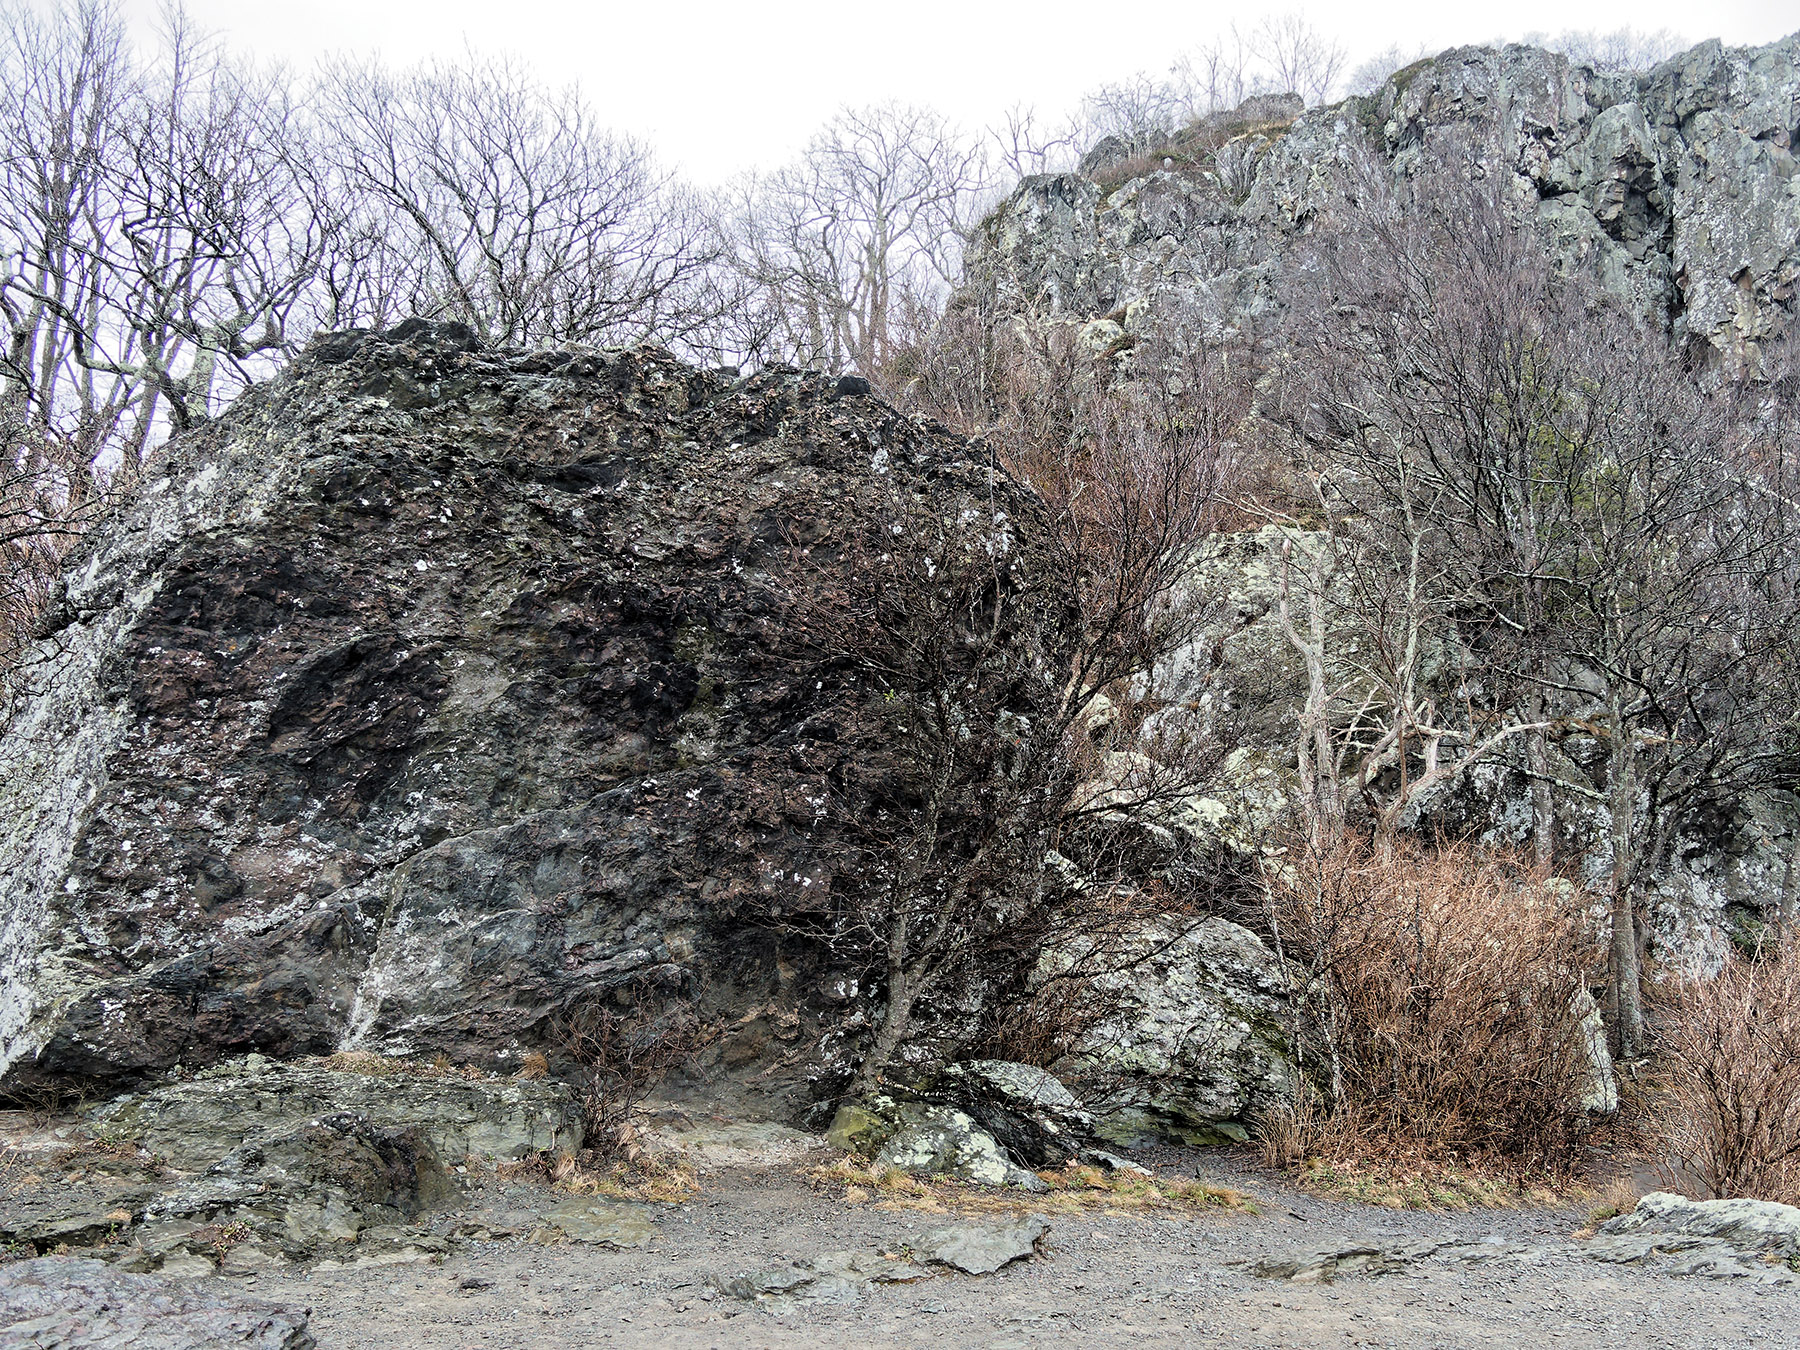 Formations of metabasaltic breccia on Little Stony Man Mountain at the top of the trail from Little Stony Man Park.